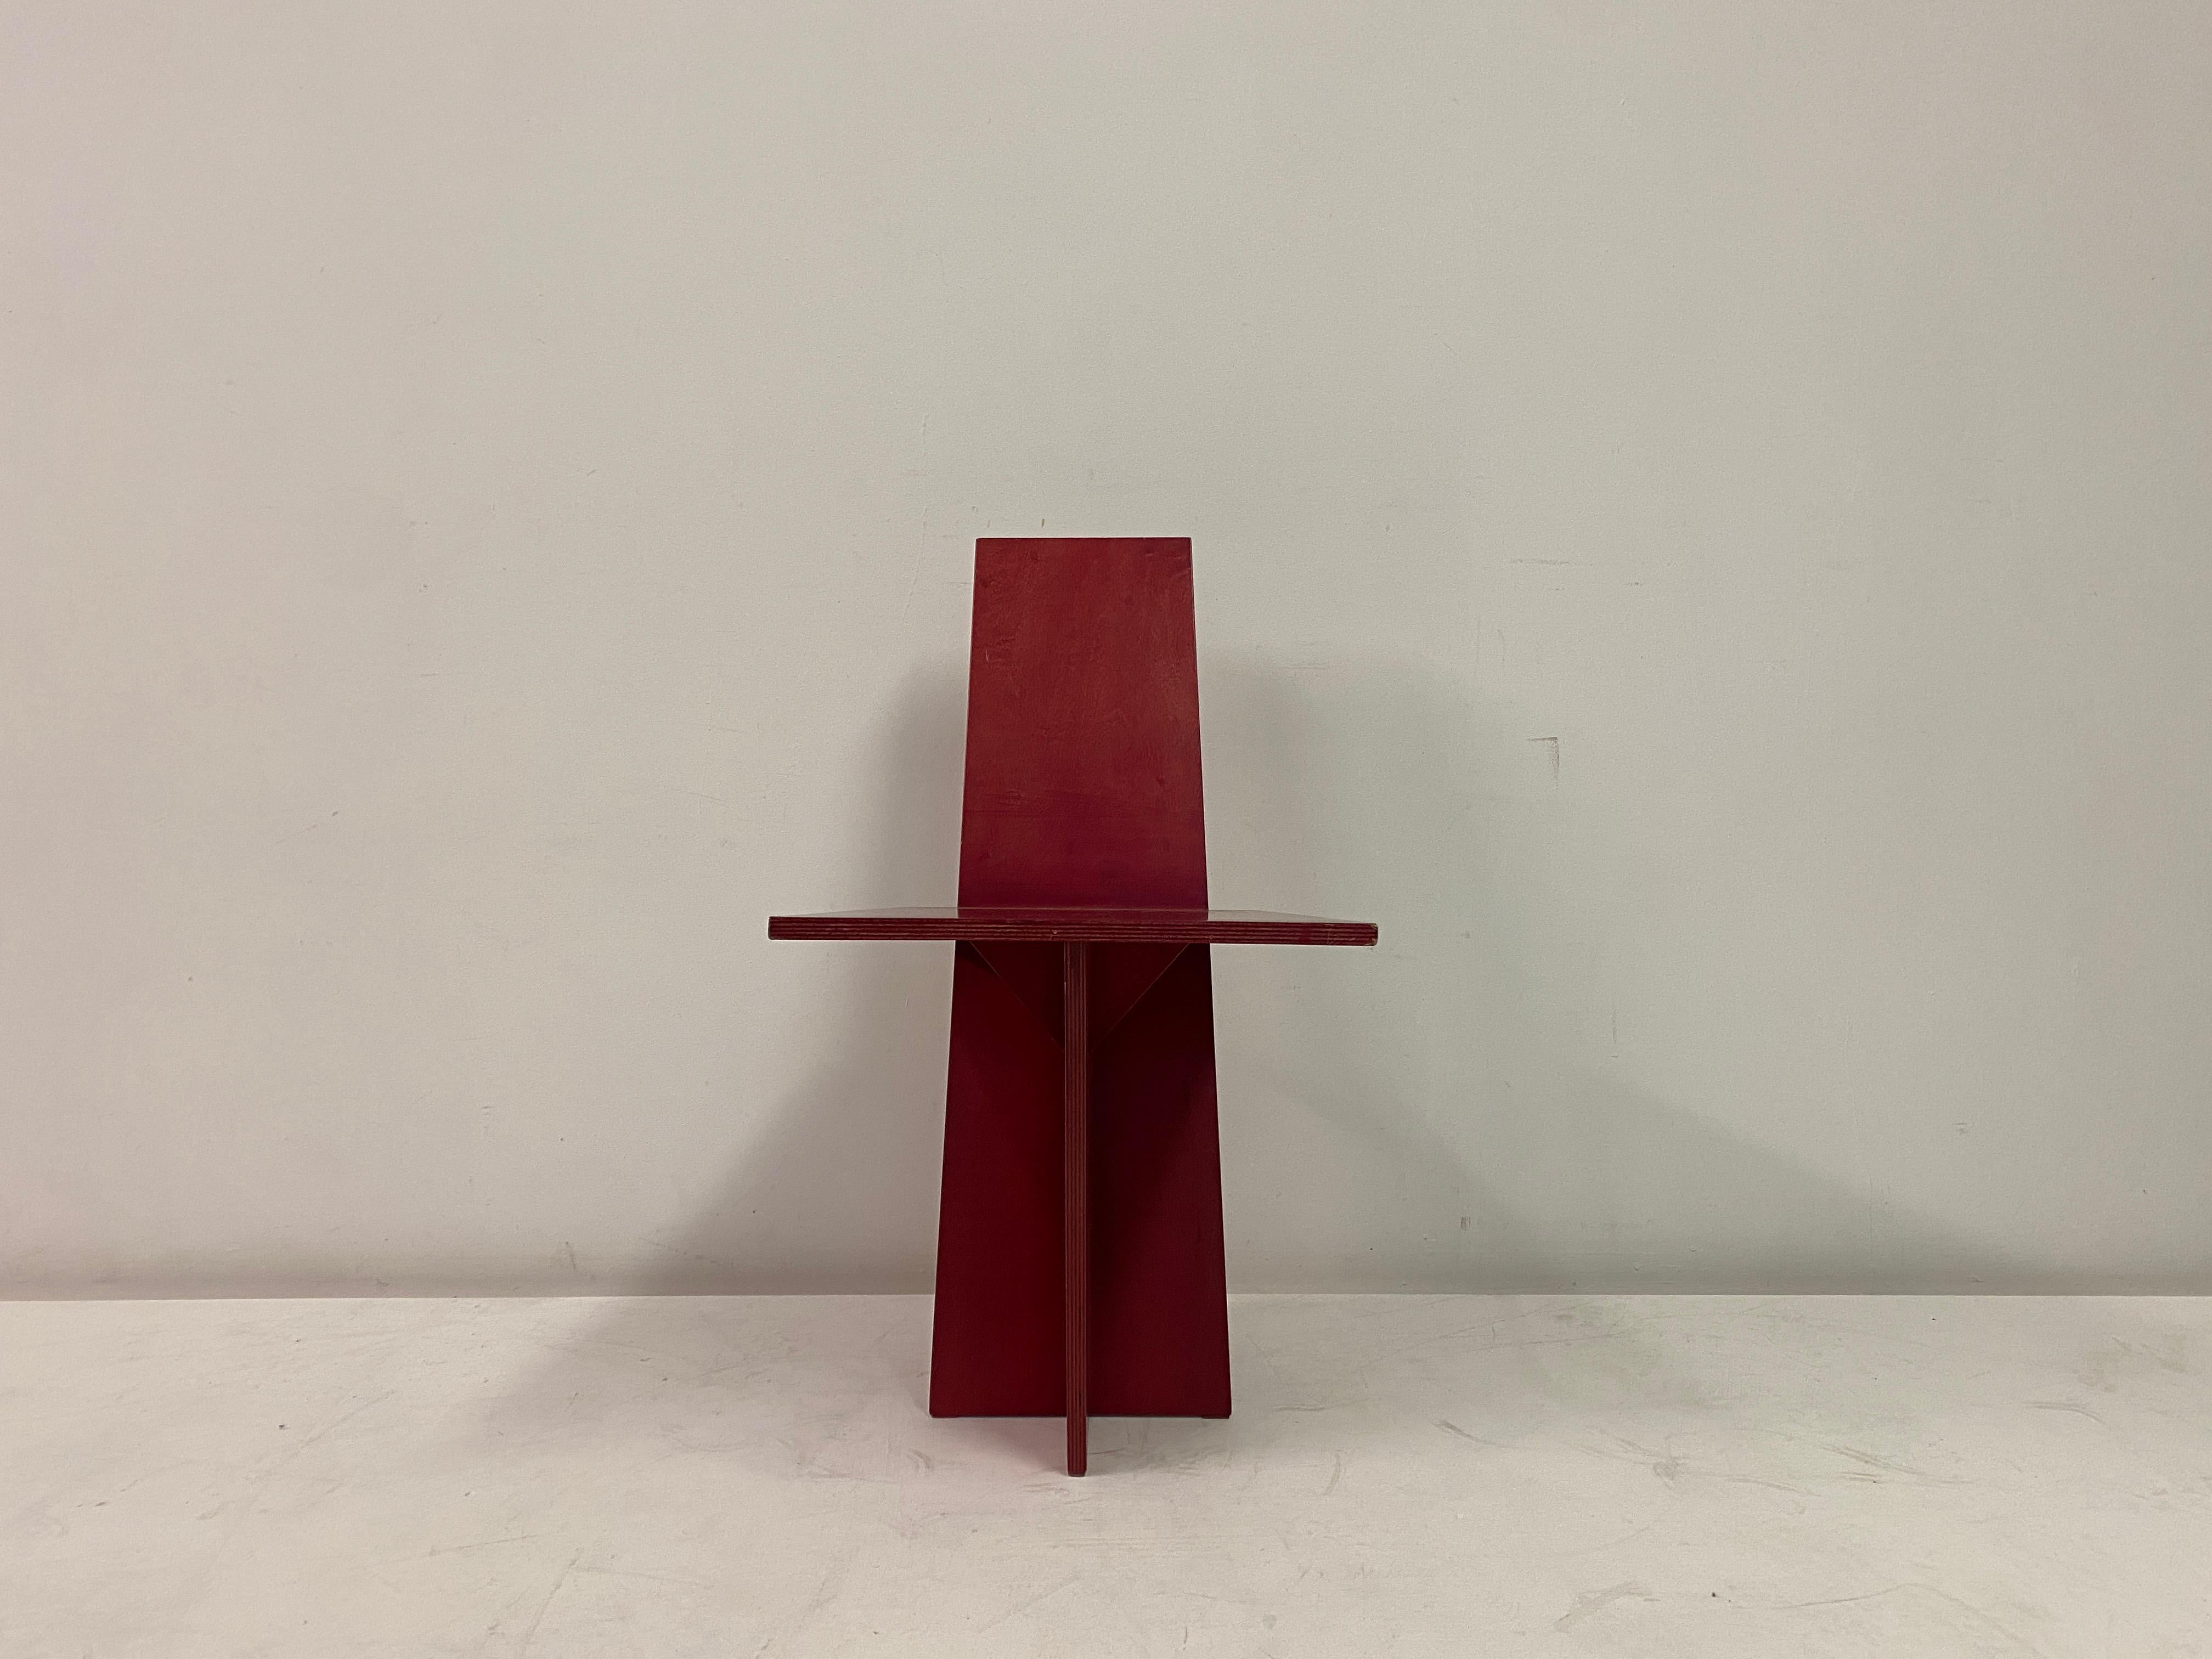 Plywood chair

Modernist

Red painted

Maker unknown

1970s-1980s

Sourced from Italy 

Measures: Seat height 44cm.